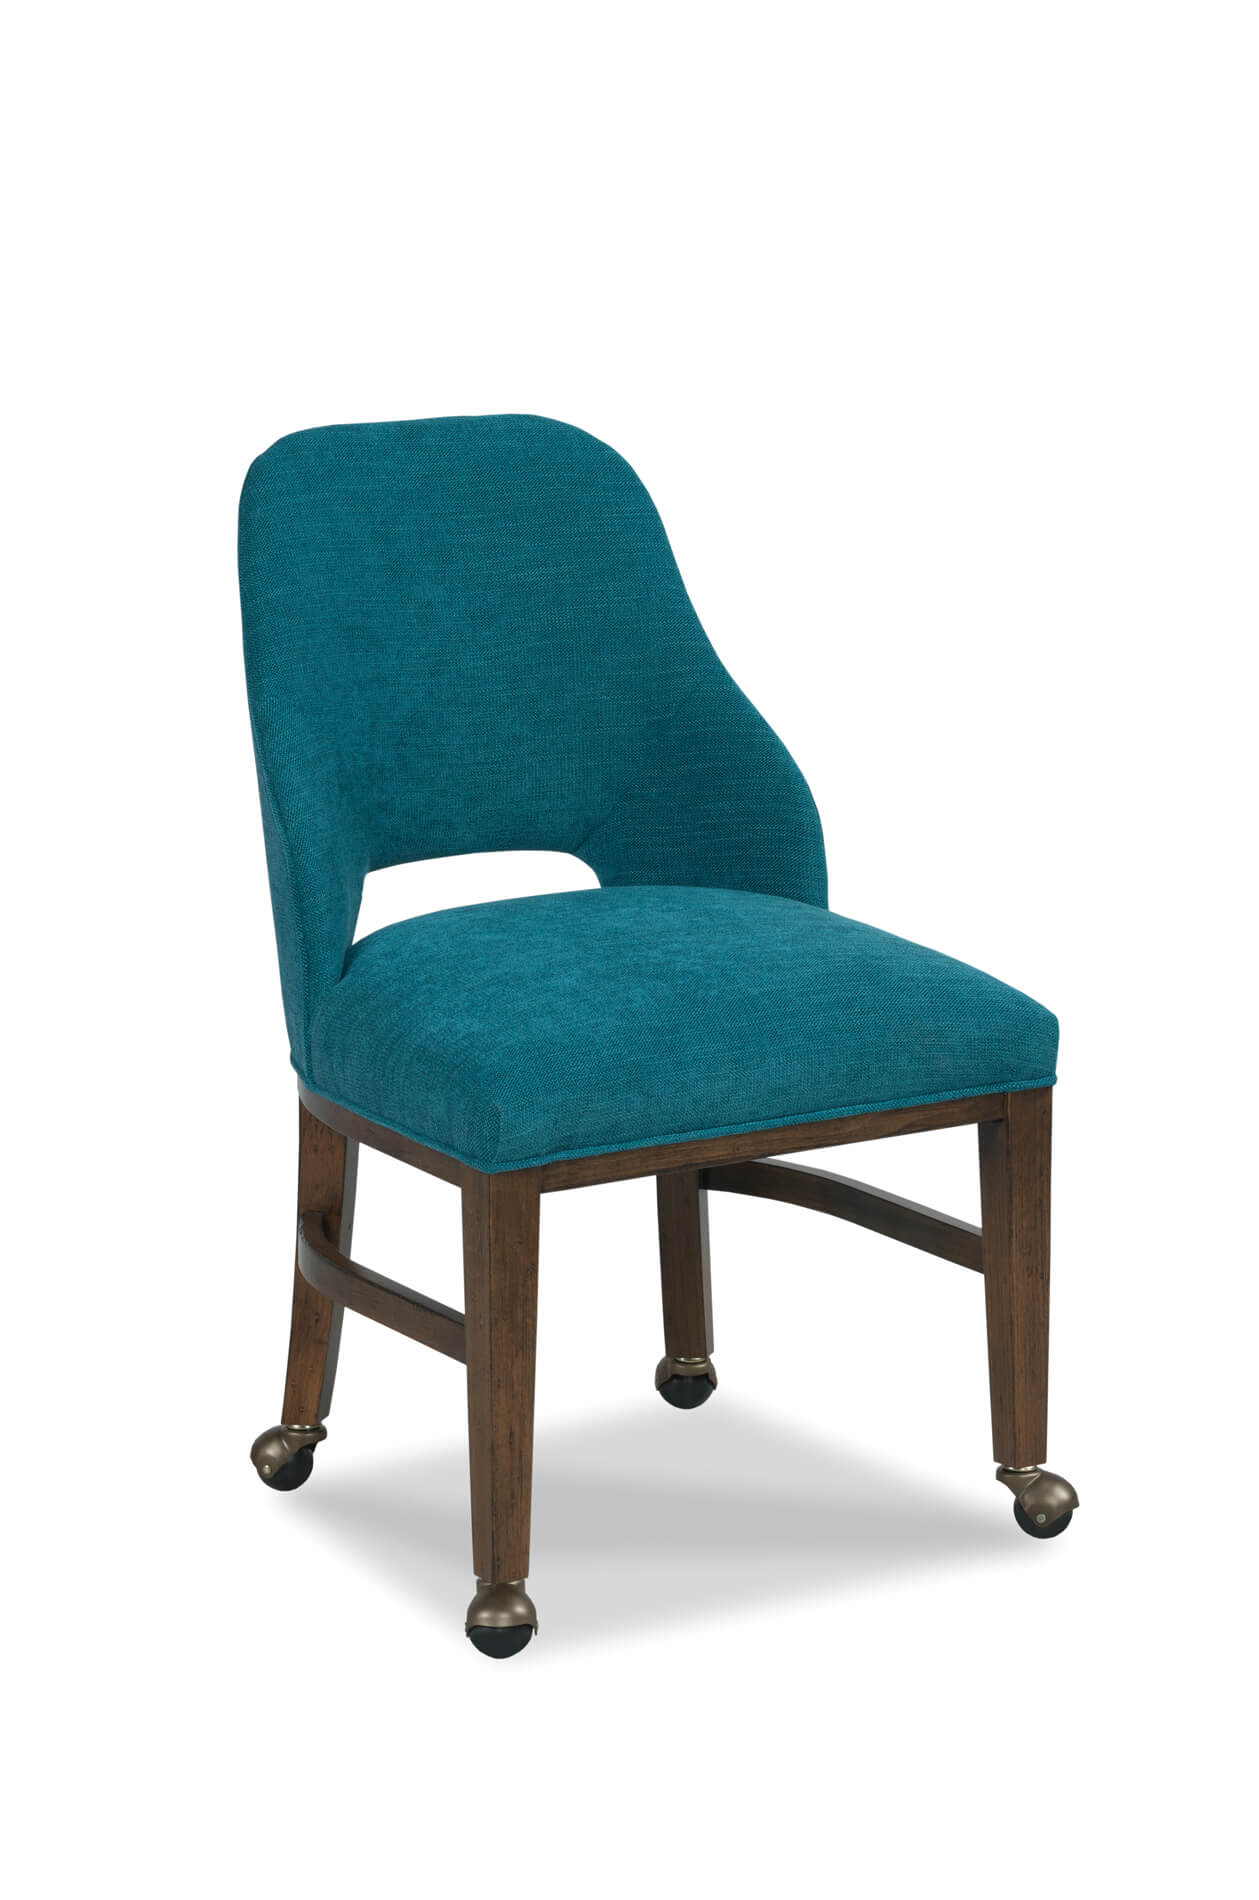 Darien Upholstered Dining Chair, Upholstered Dining Room Chairs With Arms And Casters